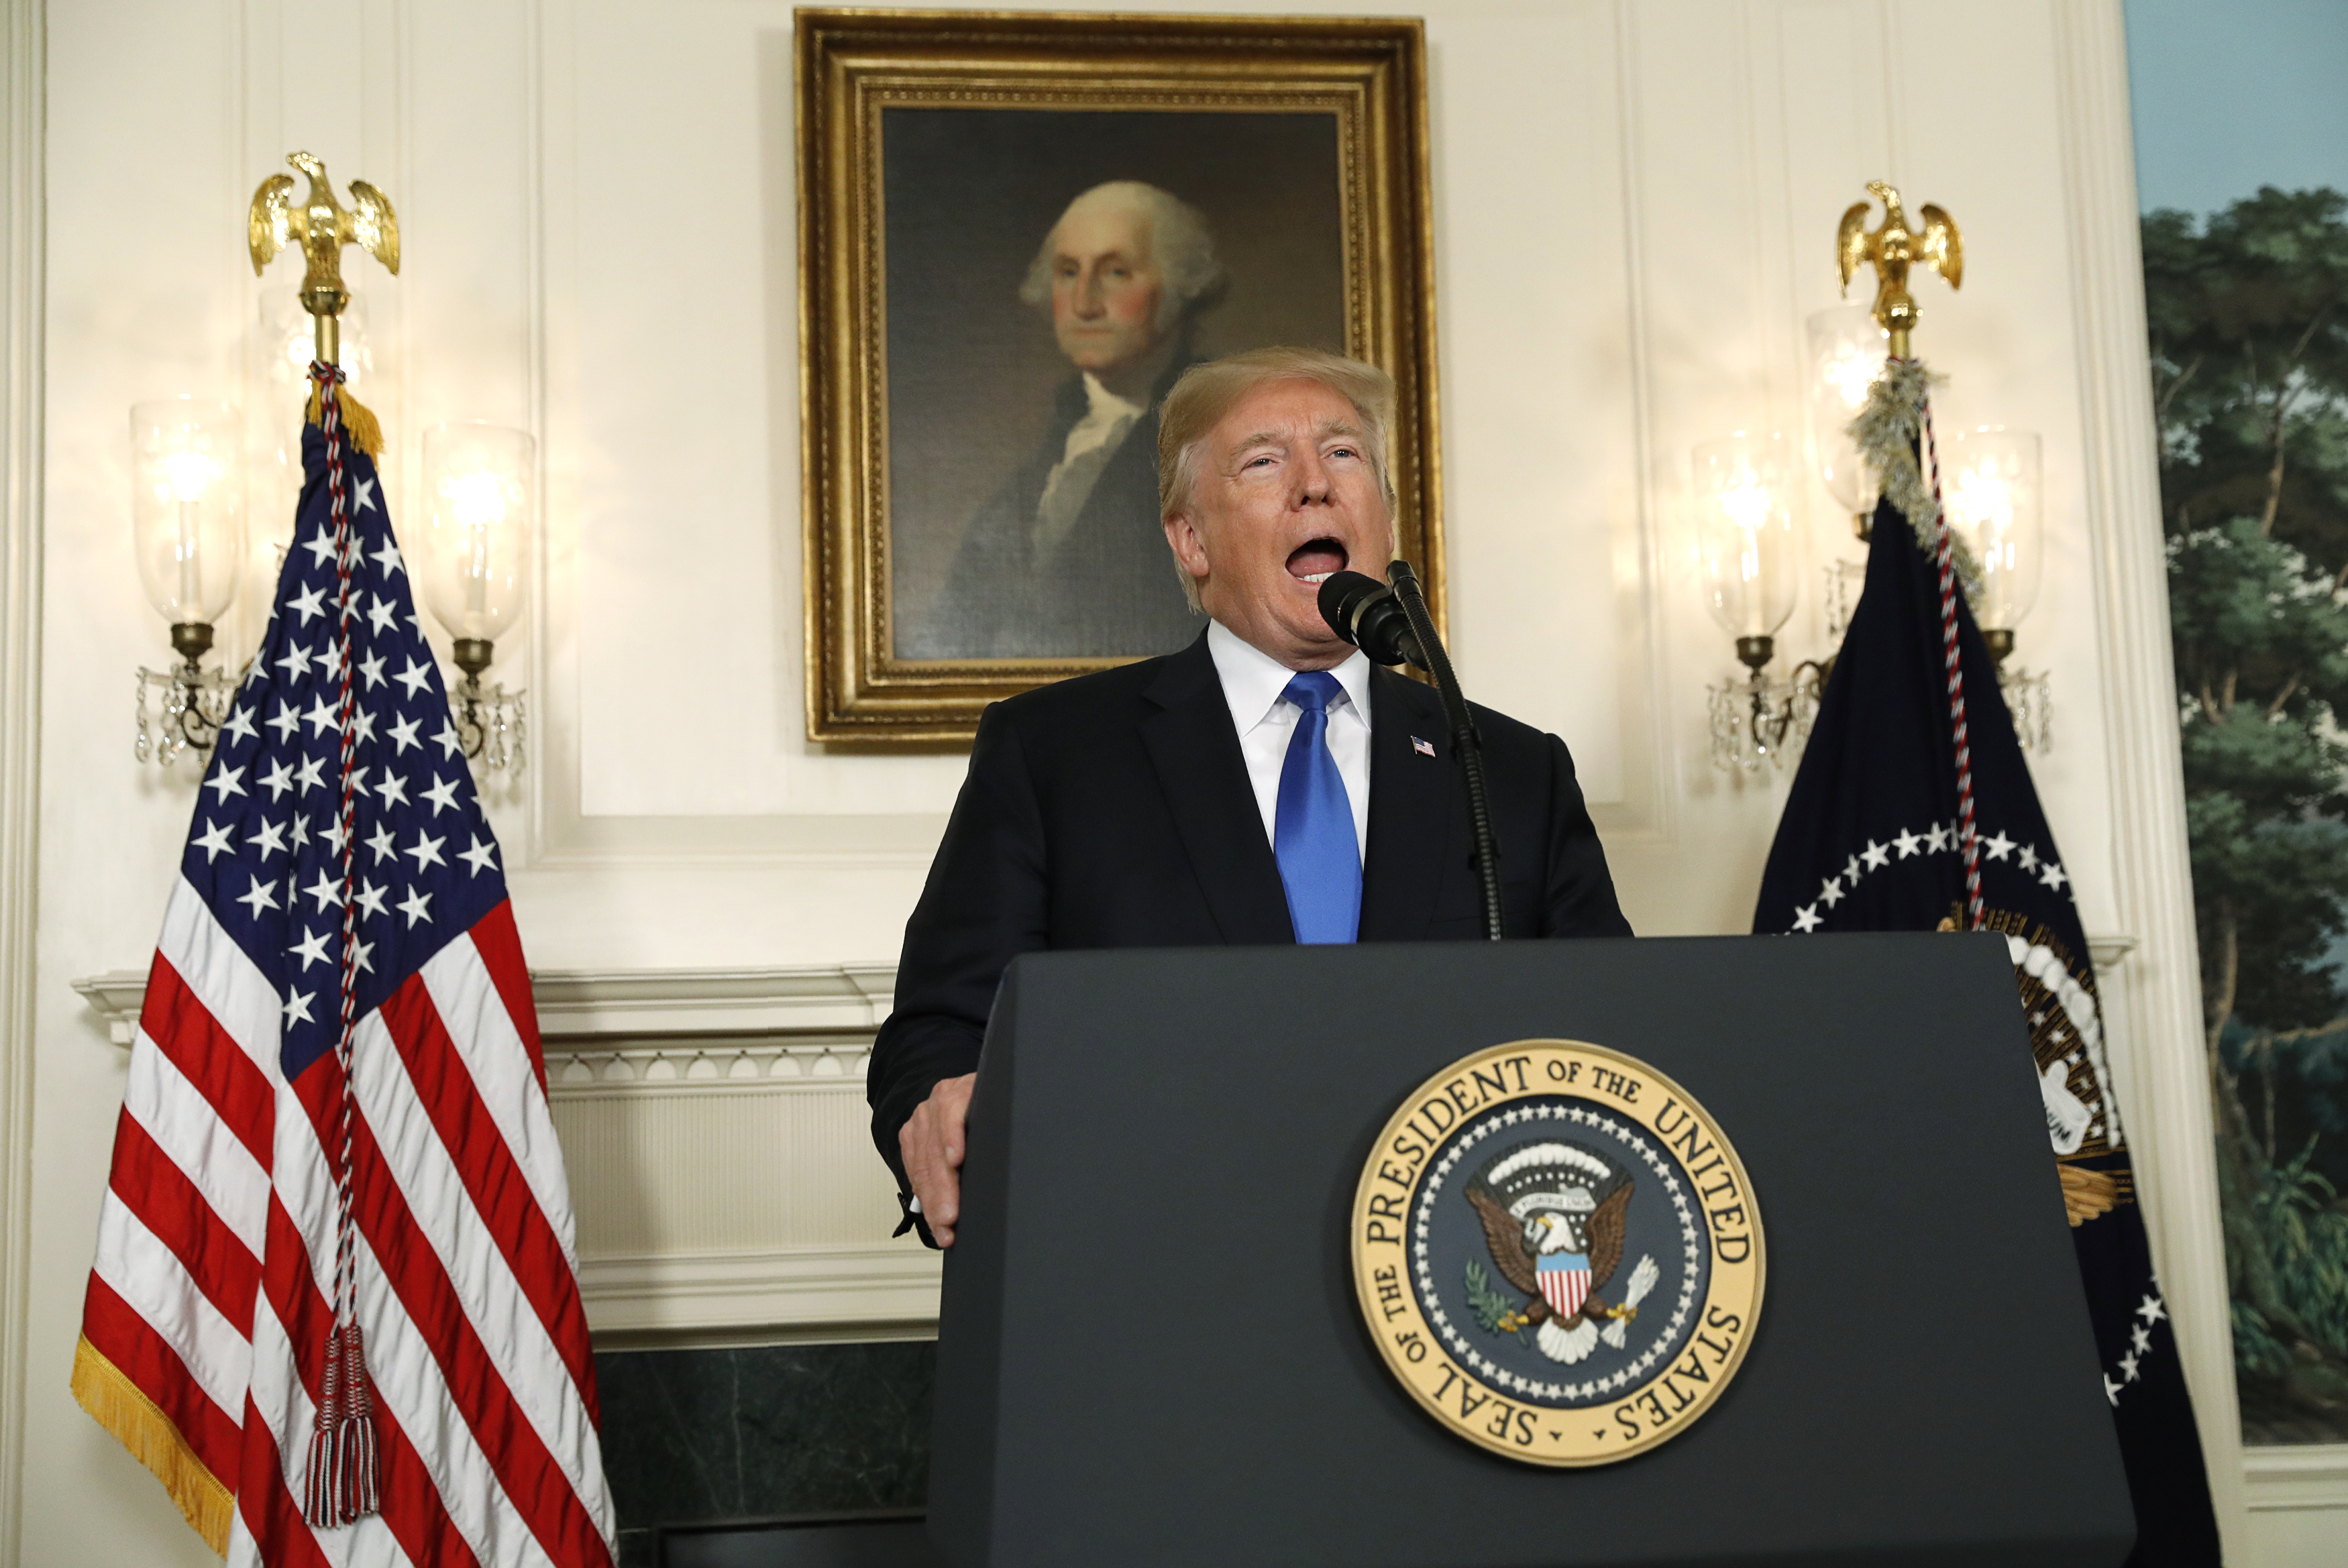 U.S. President Donald Trump speaks about Iran and the Iran nuclear deal in the Diplomatic Room of the White House in Washington, U.S., October 13, 2017. REUTERS/Kevin Lamarque - HP1EDAD1B589P